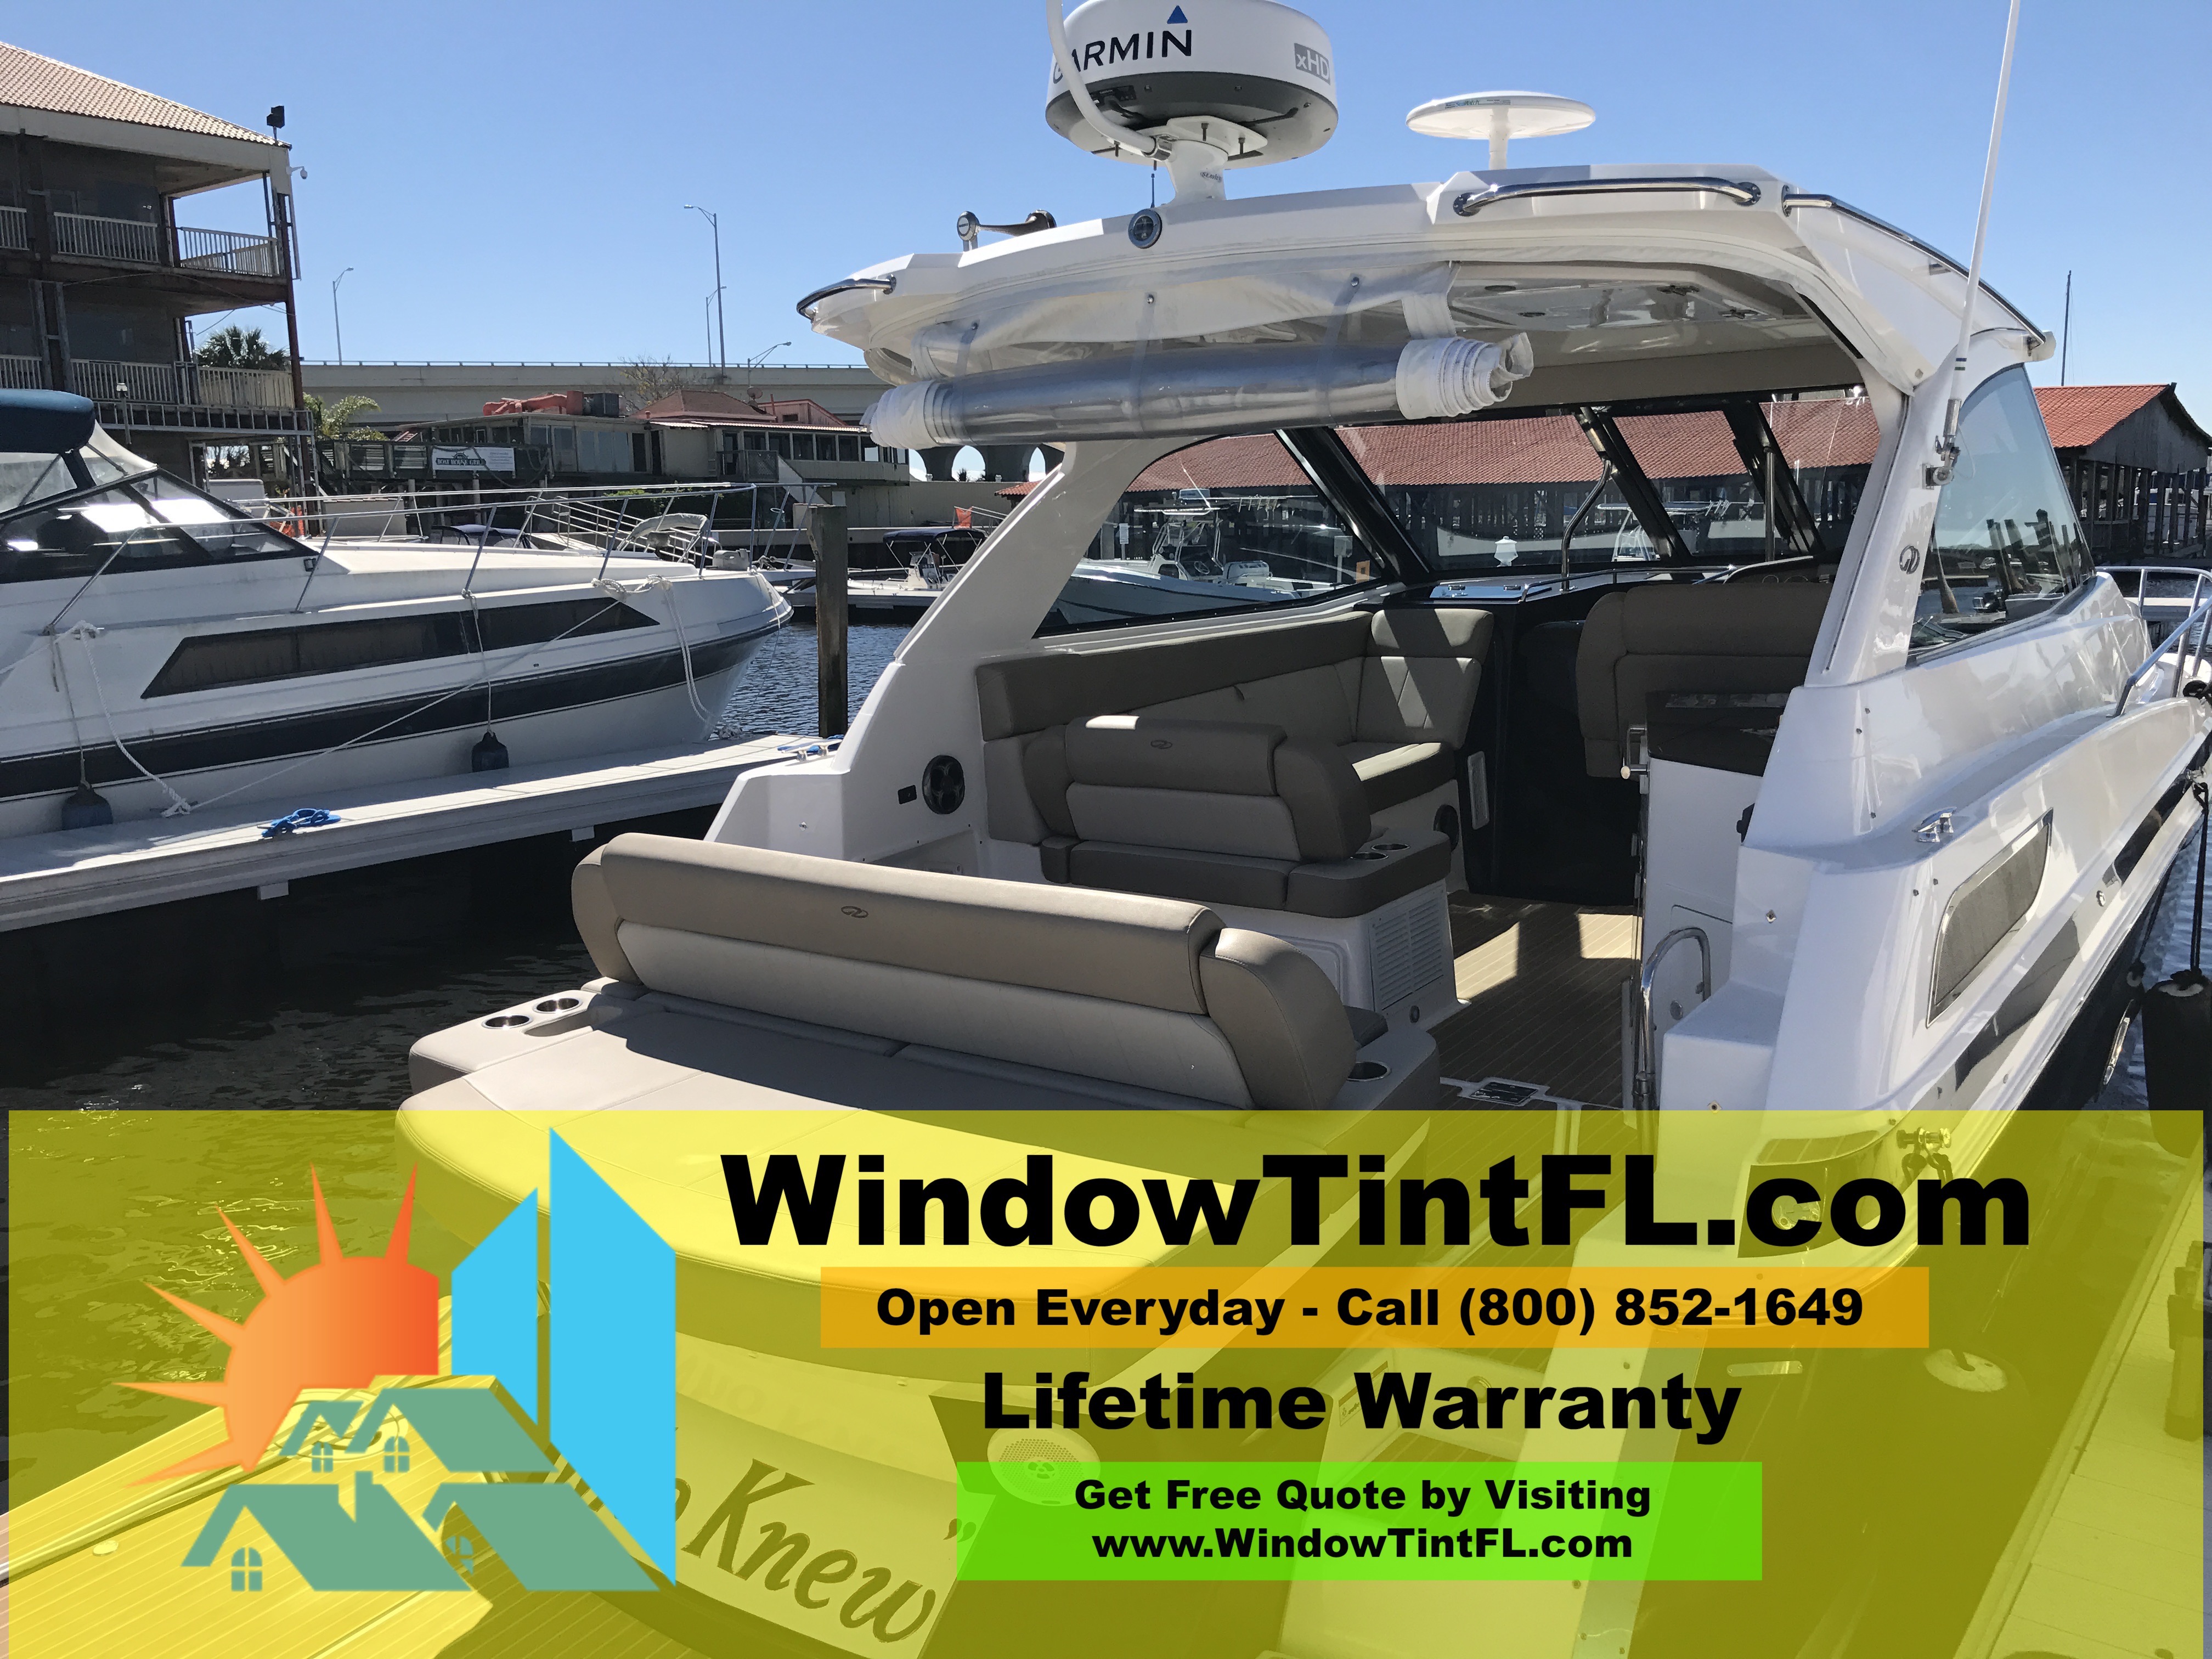 Boat Tint in Clearwater Florida - Marine Window Film